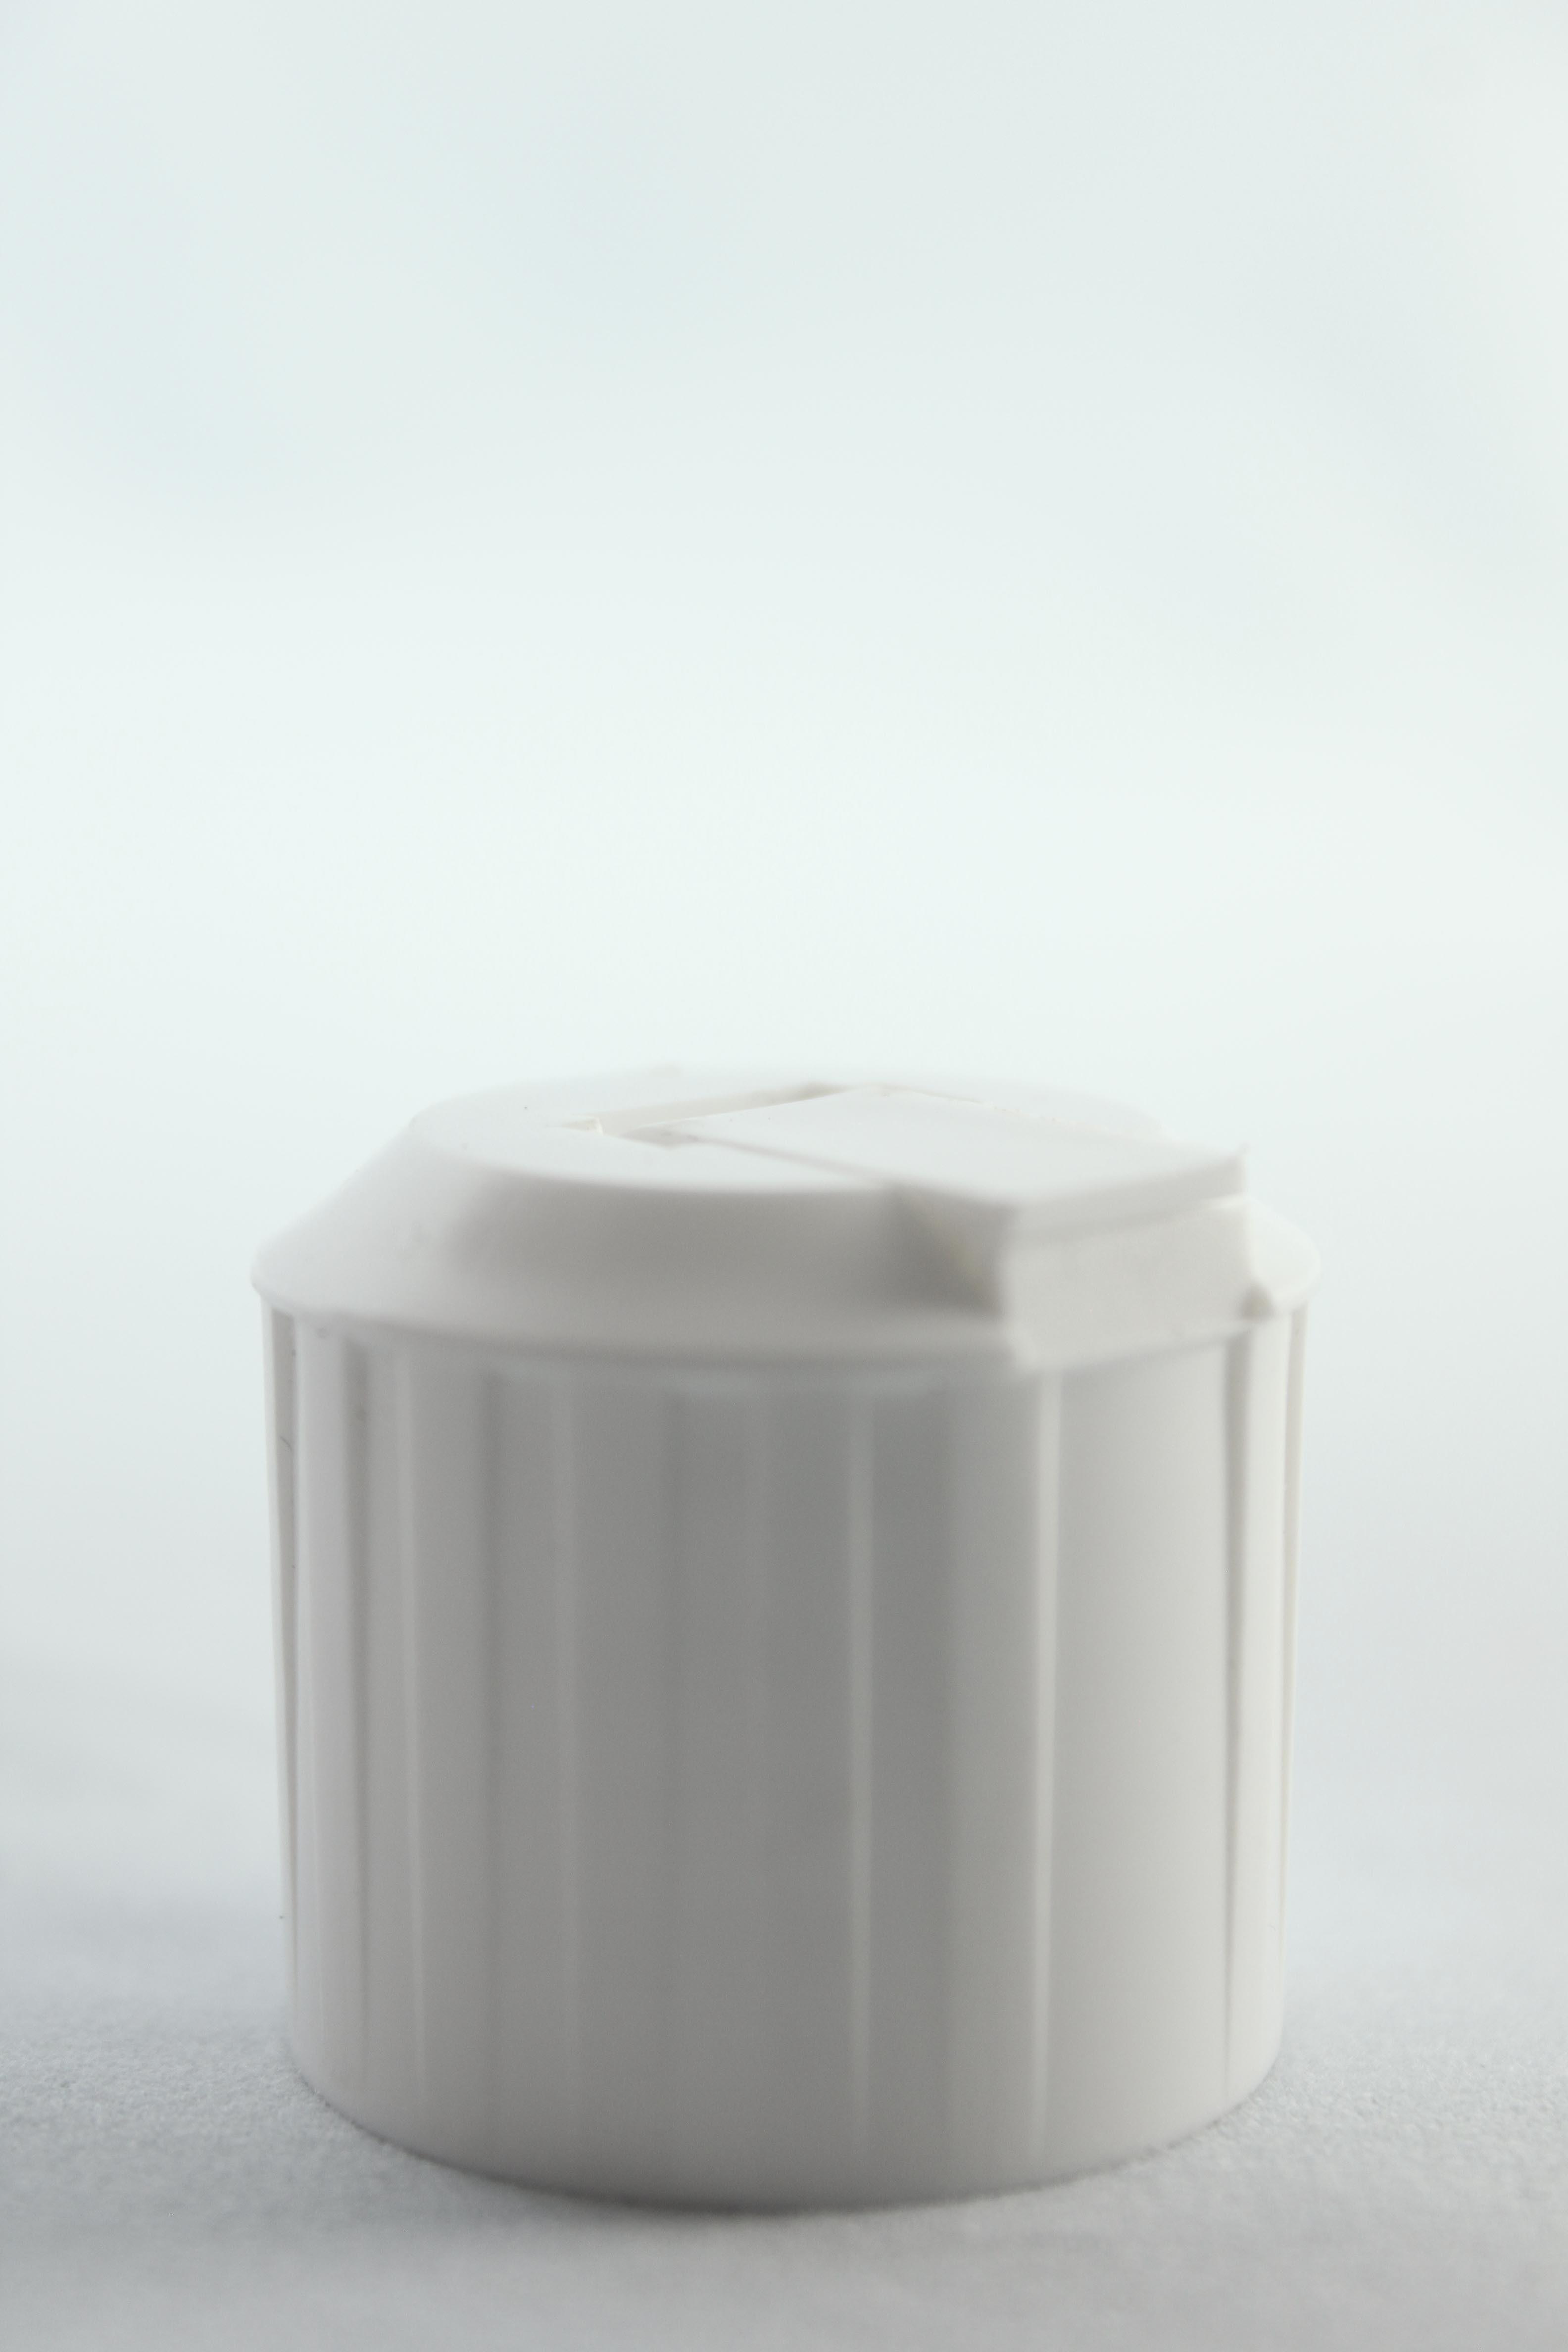 28mm 410 VARIABLE ANGLE CAP WHITE (3mm X 6mm)